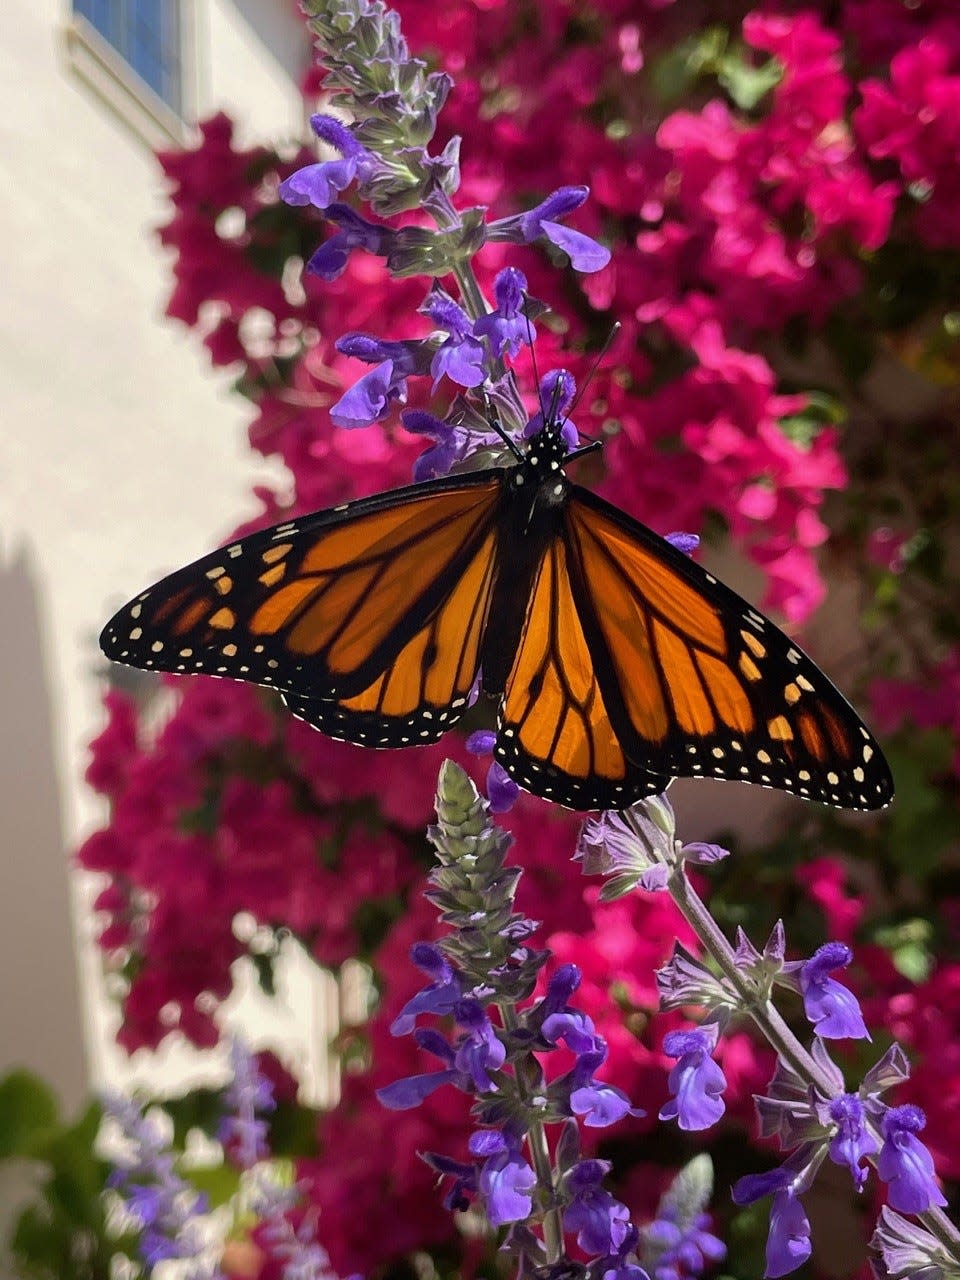 A monarch butterfly on salvia.